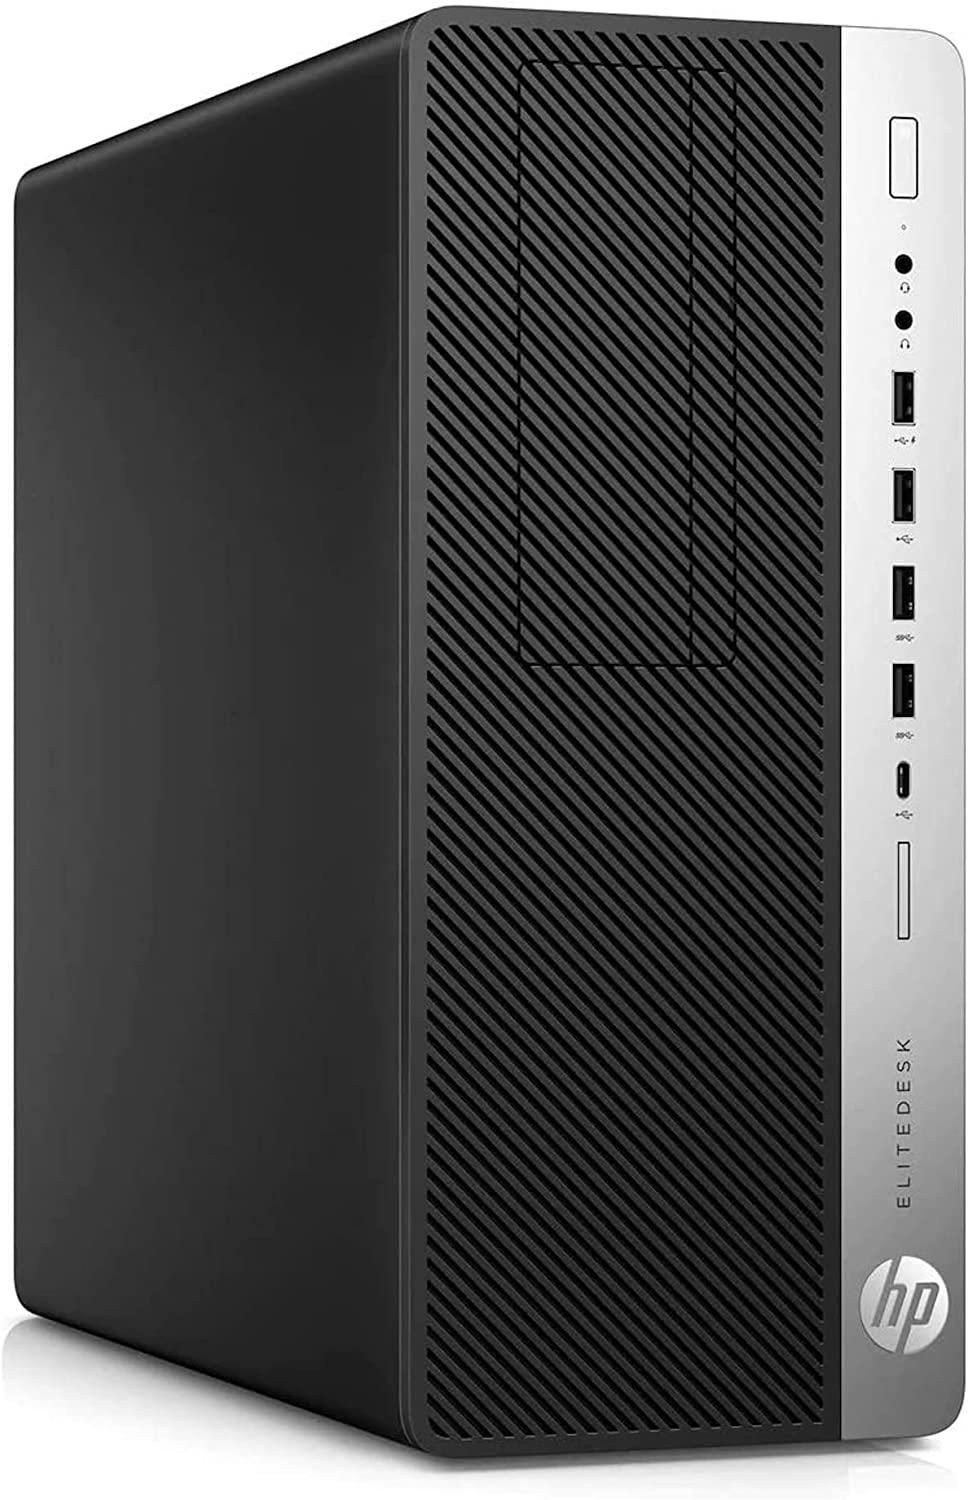 HP EliteDesk 800 G4 Tower Business PC Intel Core i5-8500 Processor 16GB RAM 2TB HDD Intel HD Graphics CPU Only Plus Keyboard & Mouse Boxed 1 Year Warranty